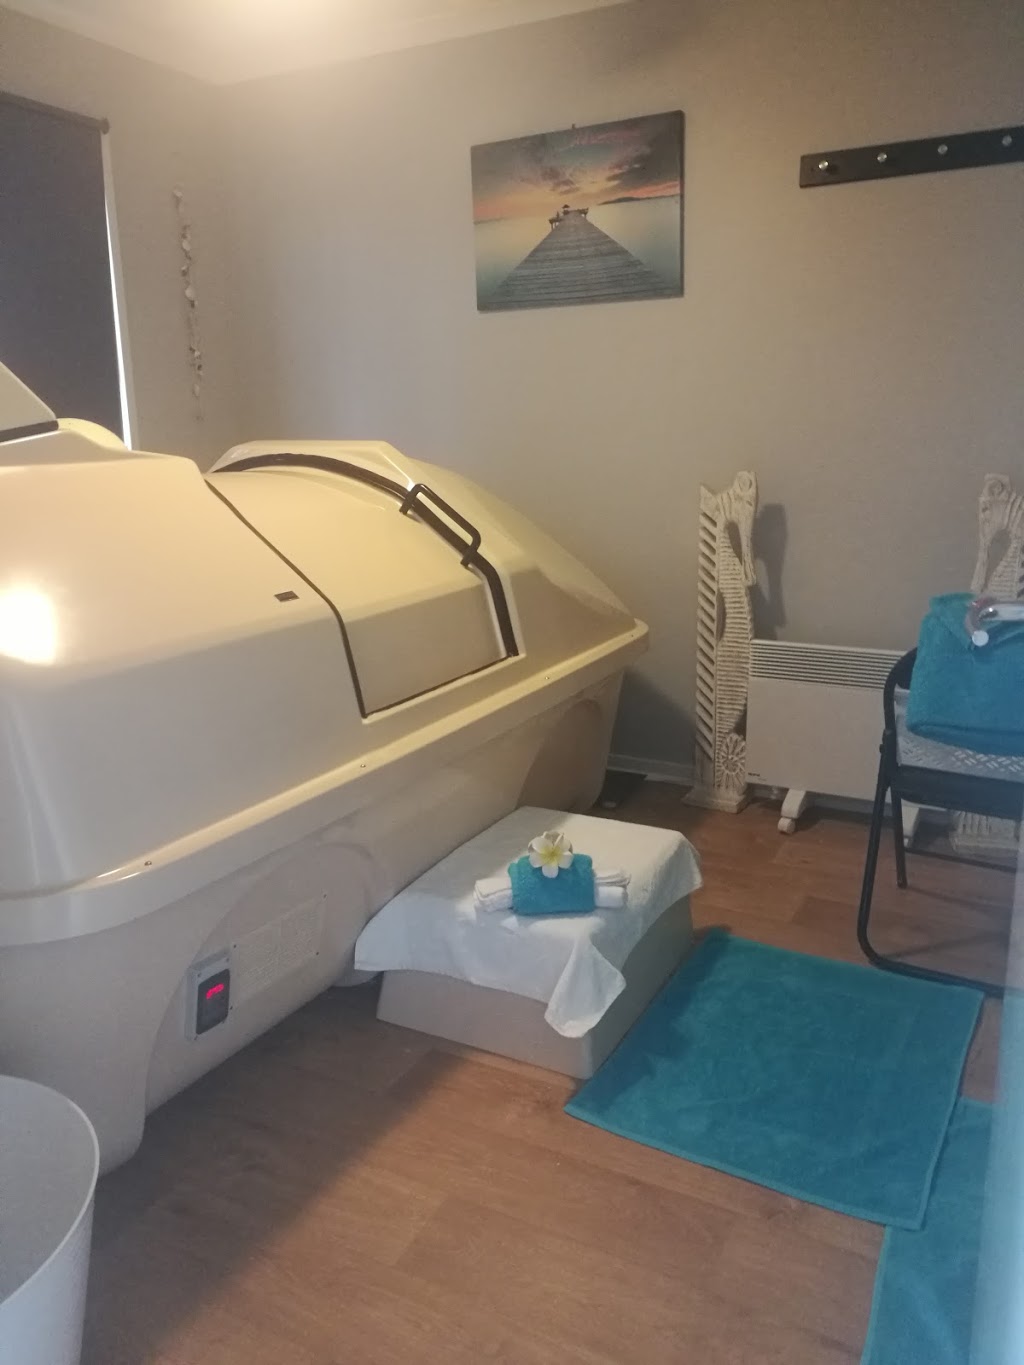 Bass Coast Float and Healing | health | 64 Tulloch St, Dalyston VIC 3992, Australia | 0400318833 OR +61 400 318 833